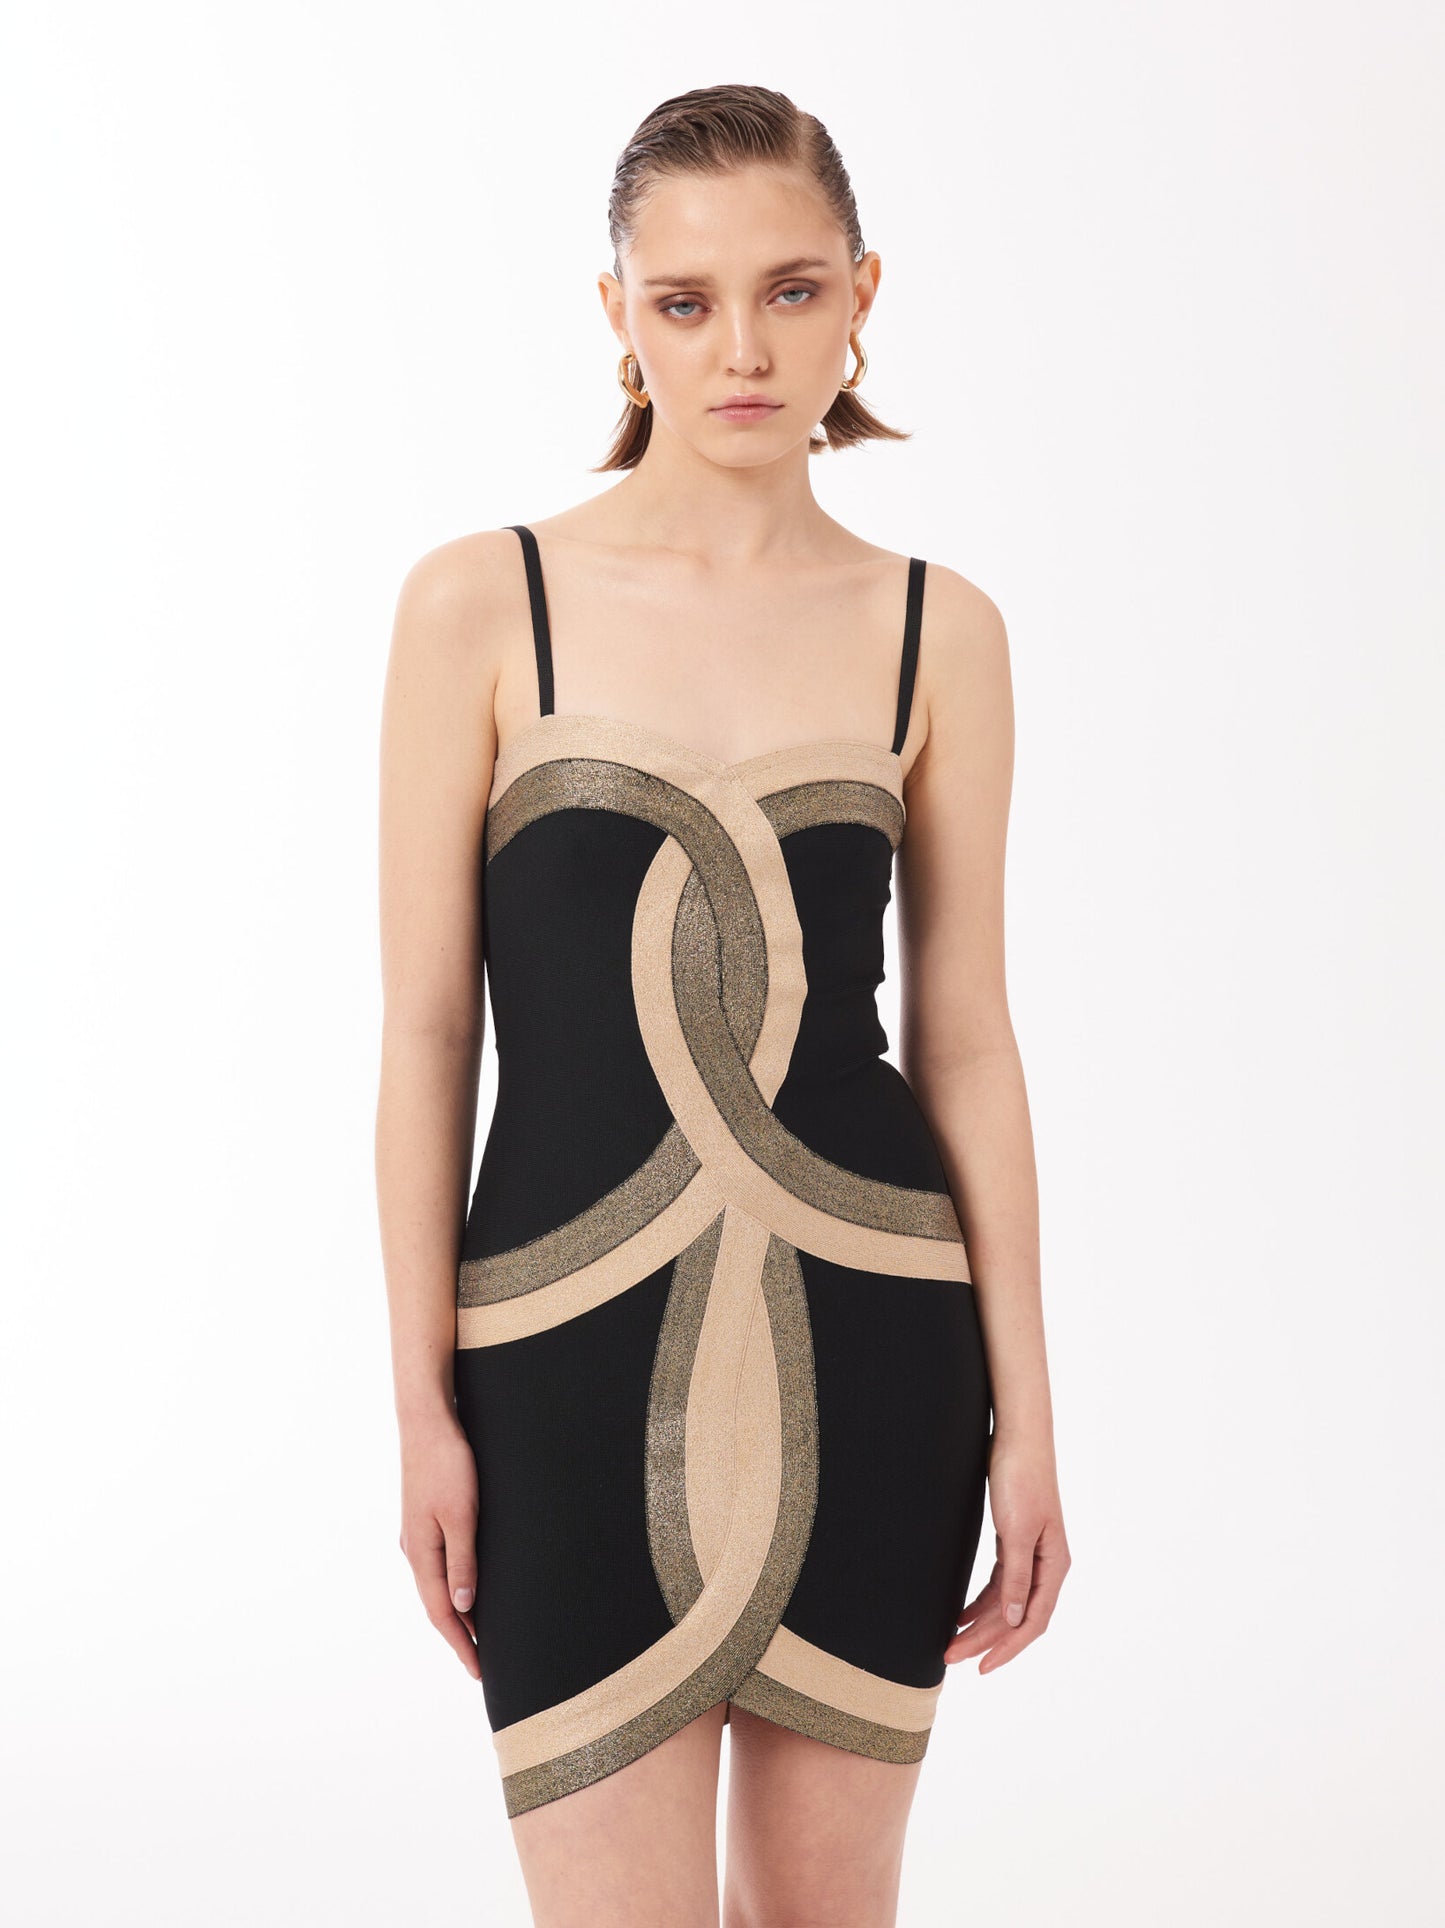 Sour Figs Bandage Mini Dress in Black and Gold